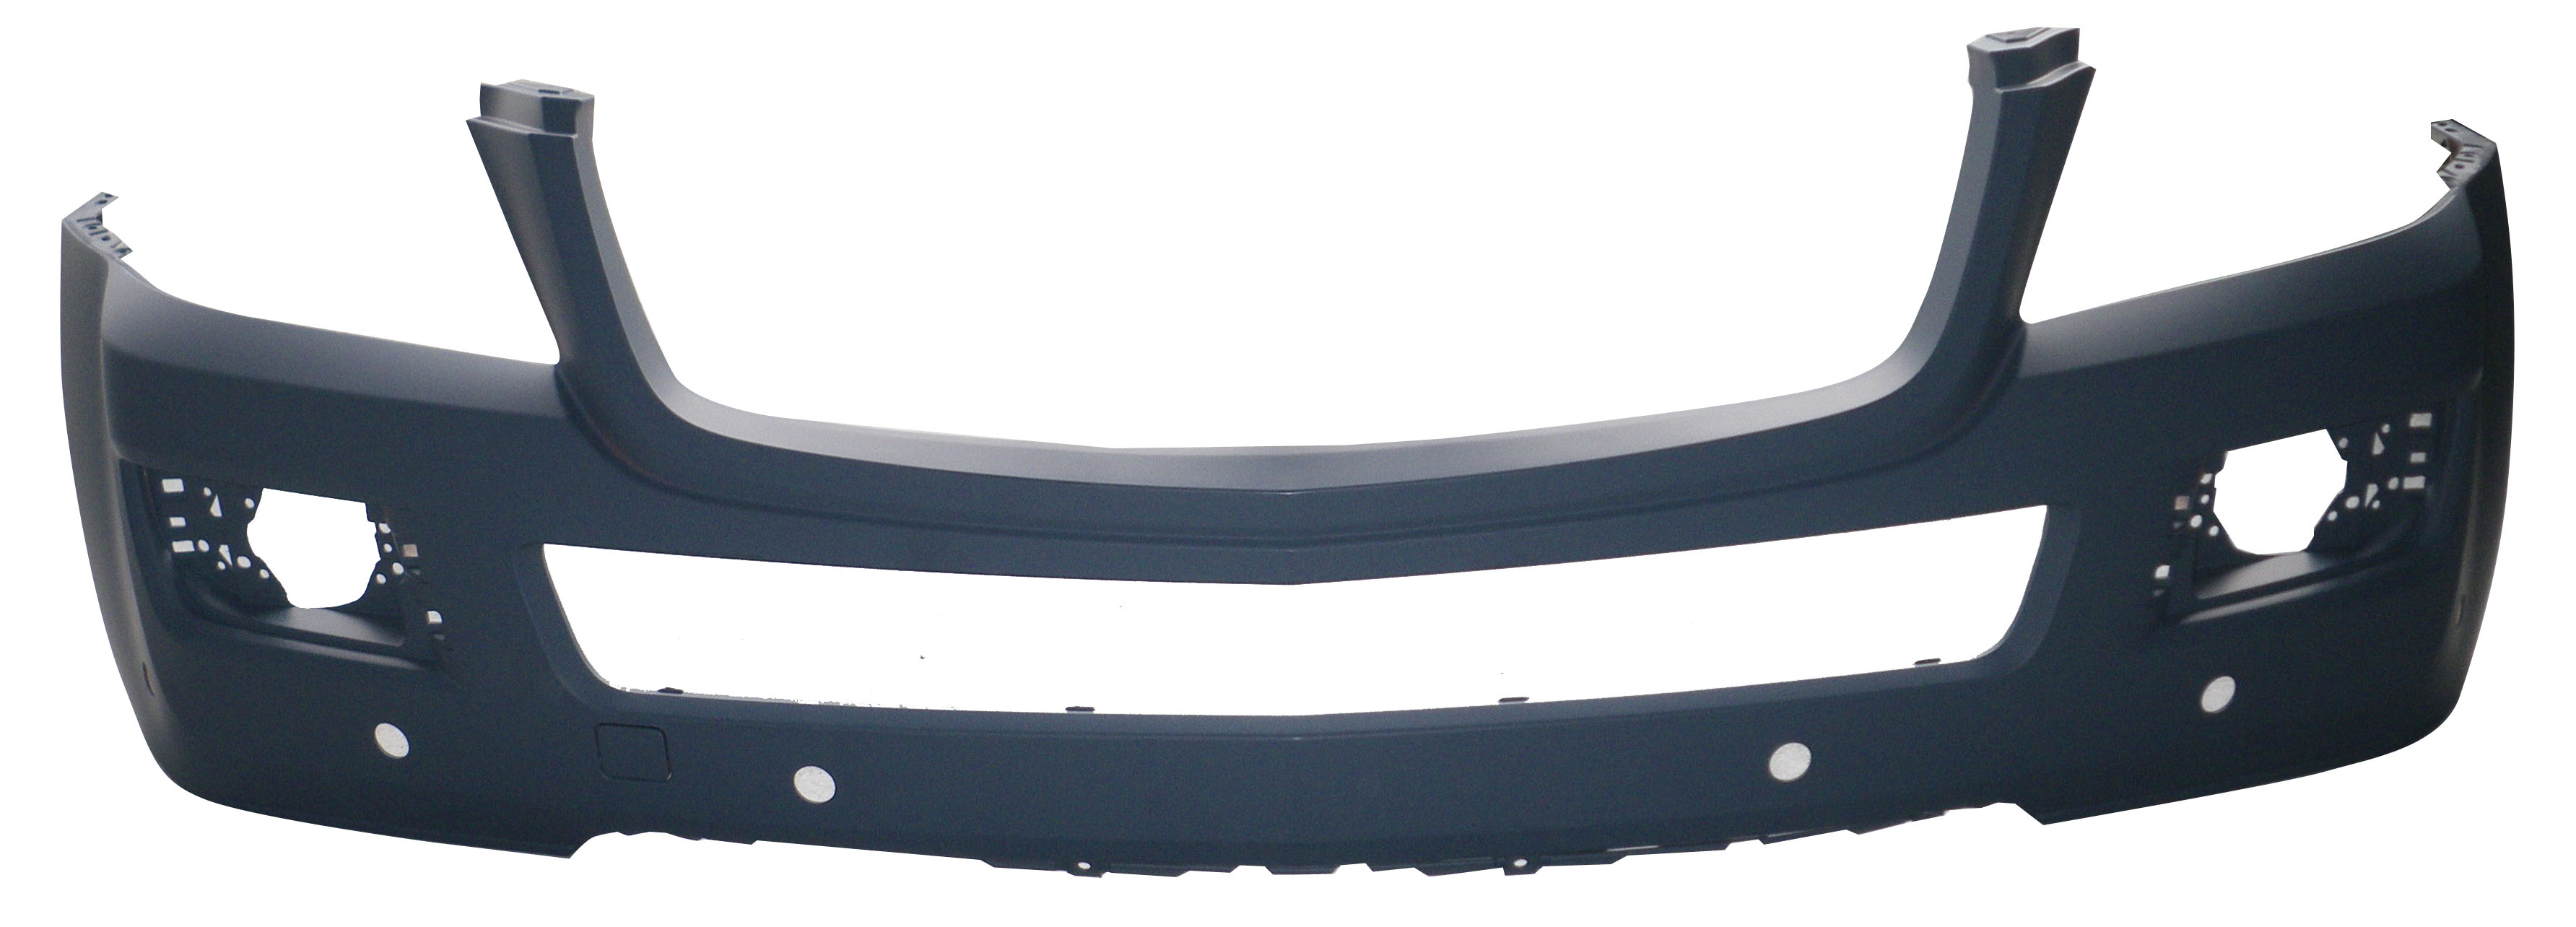 Aftermarket BUMPER COVERS for MERCEDES-BENZ - GL320, GL320,07-09,Front bumper cover